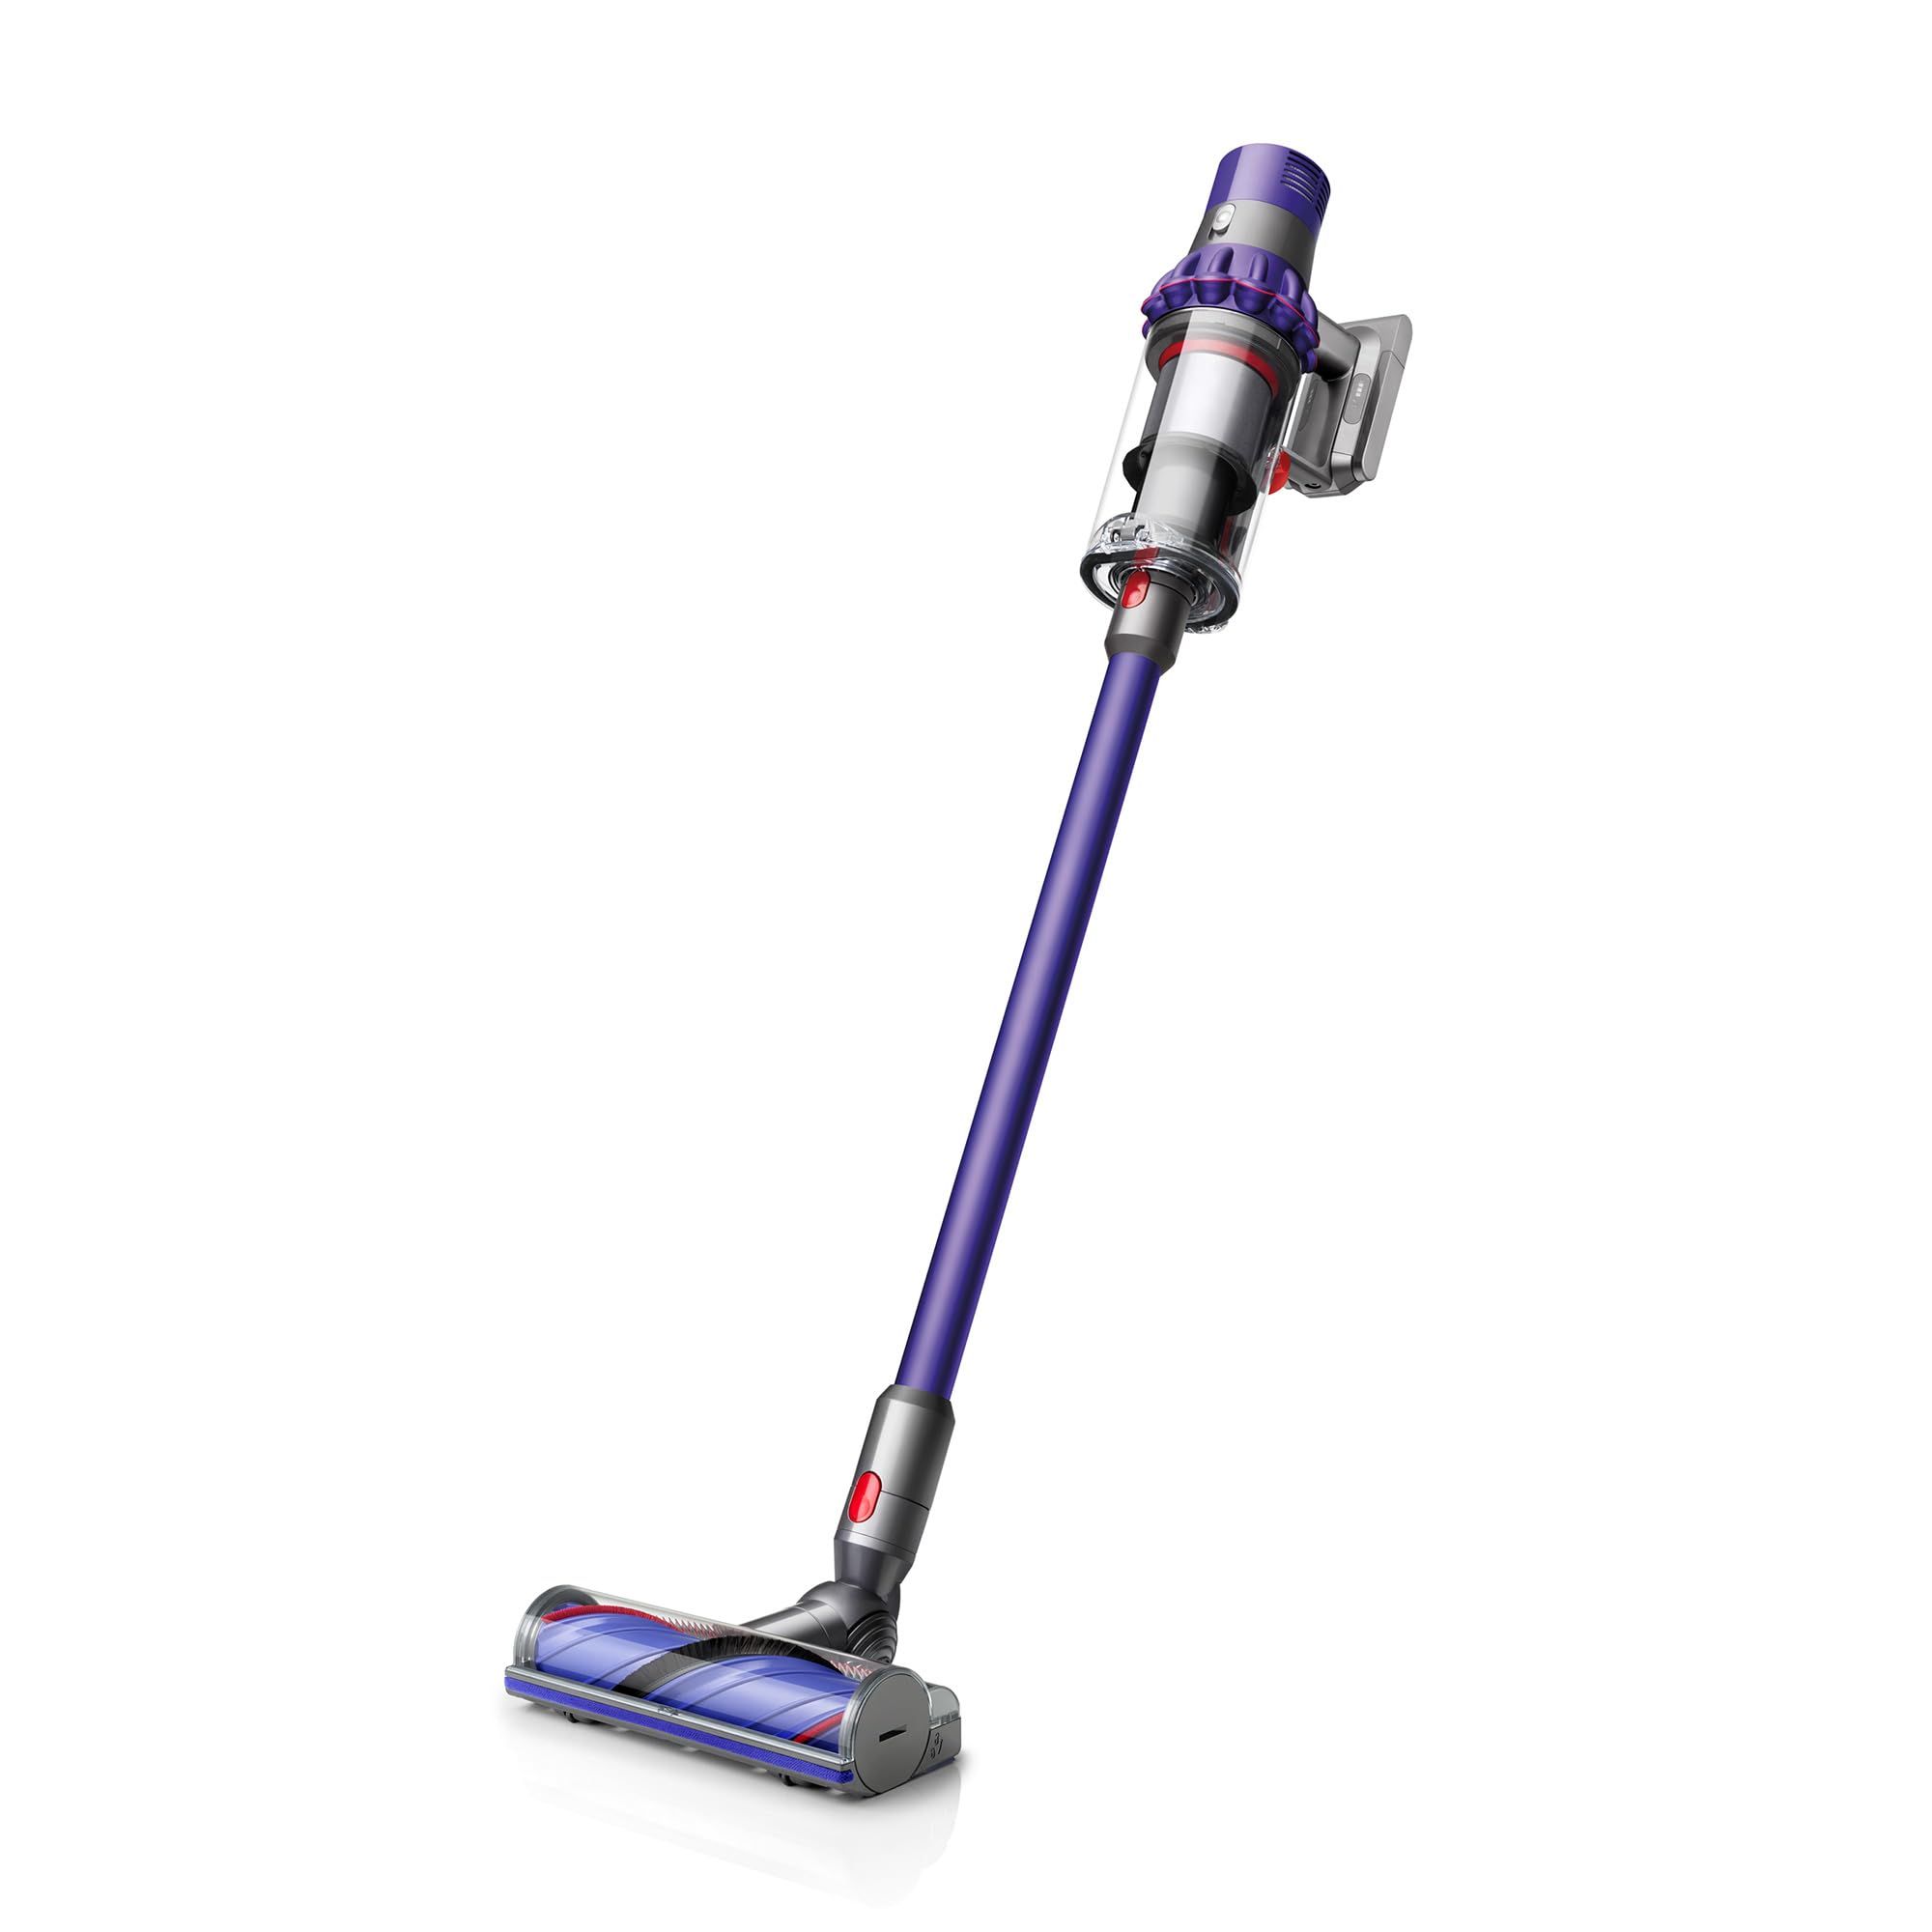 Psst, All the Dyson Products You’ve Been Eyeing Are on Sale for Prime Day 👀